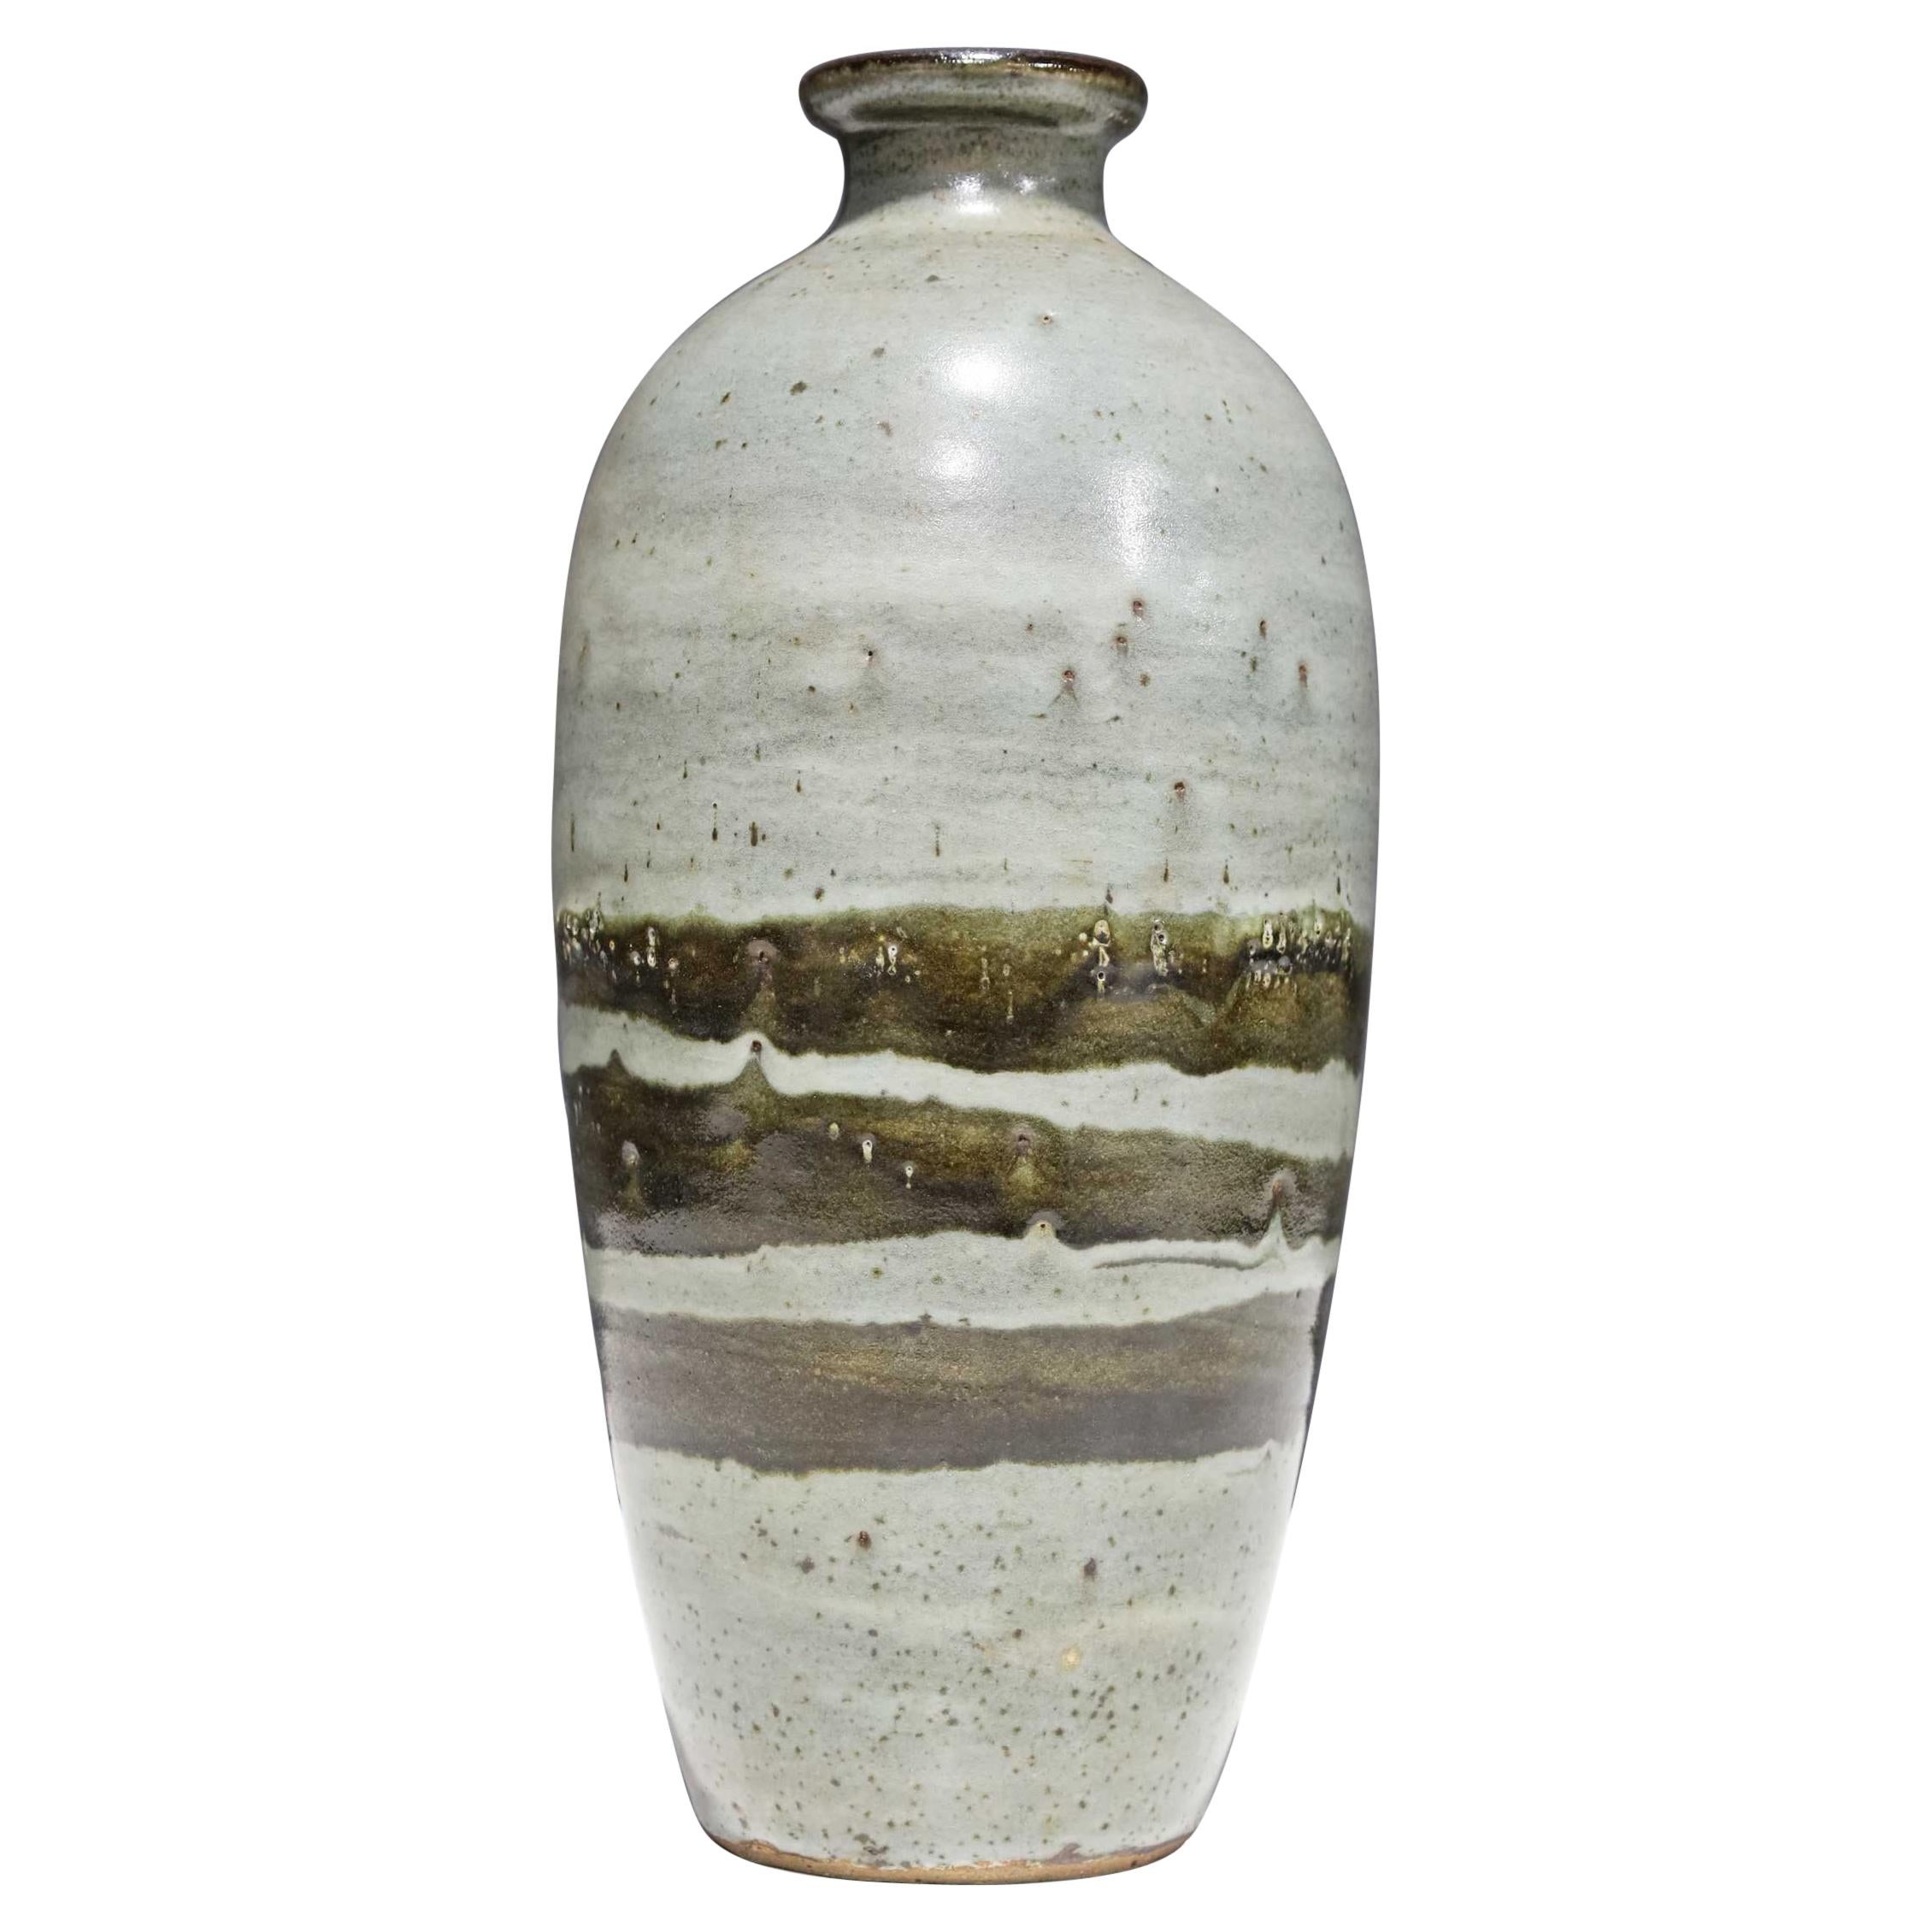 Large Rounded Ceramic Vase by Albert Green